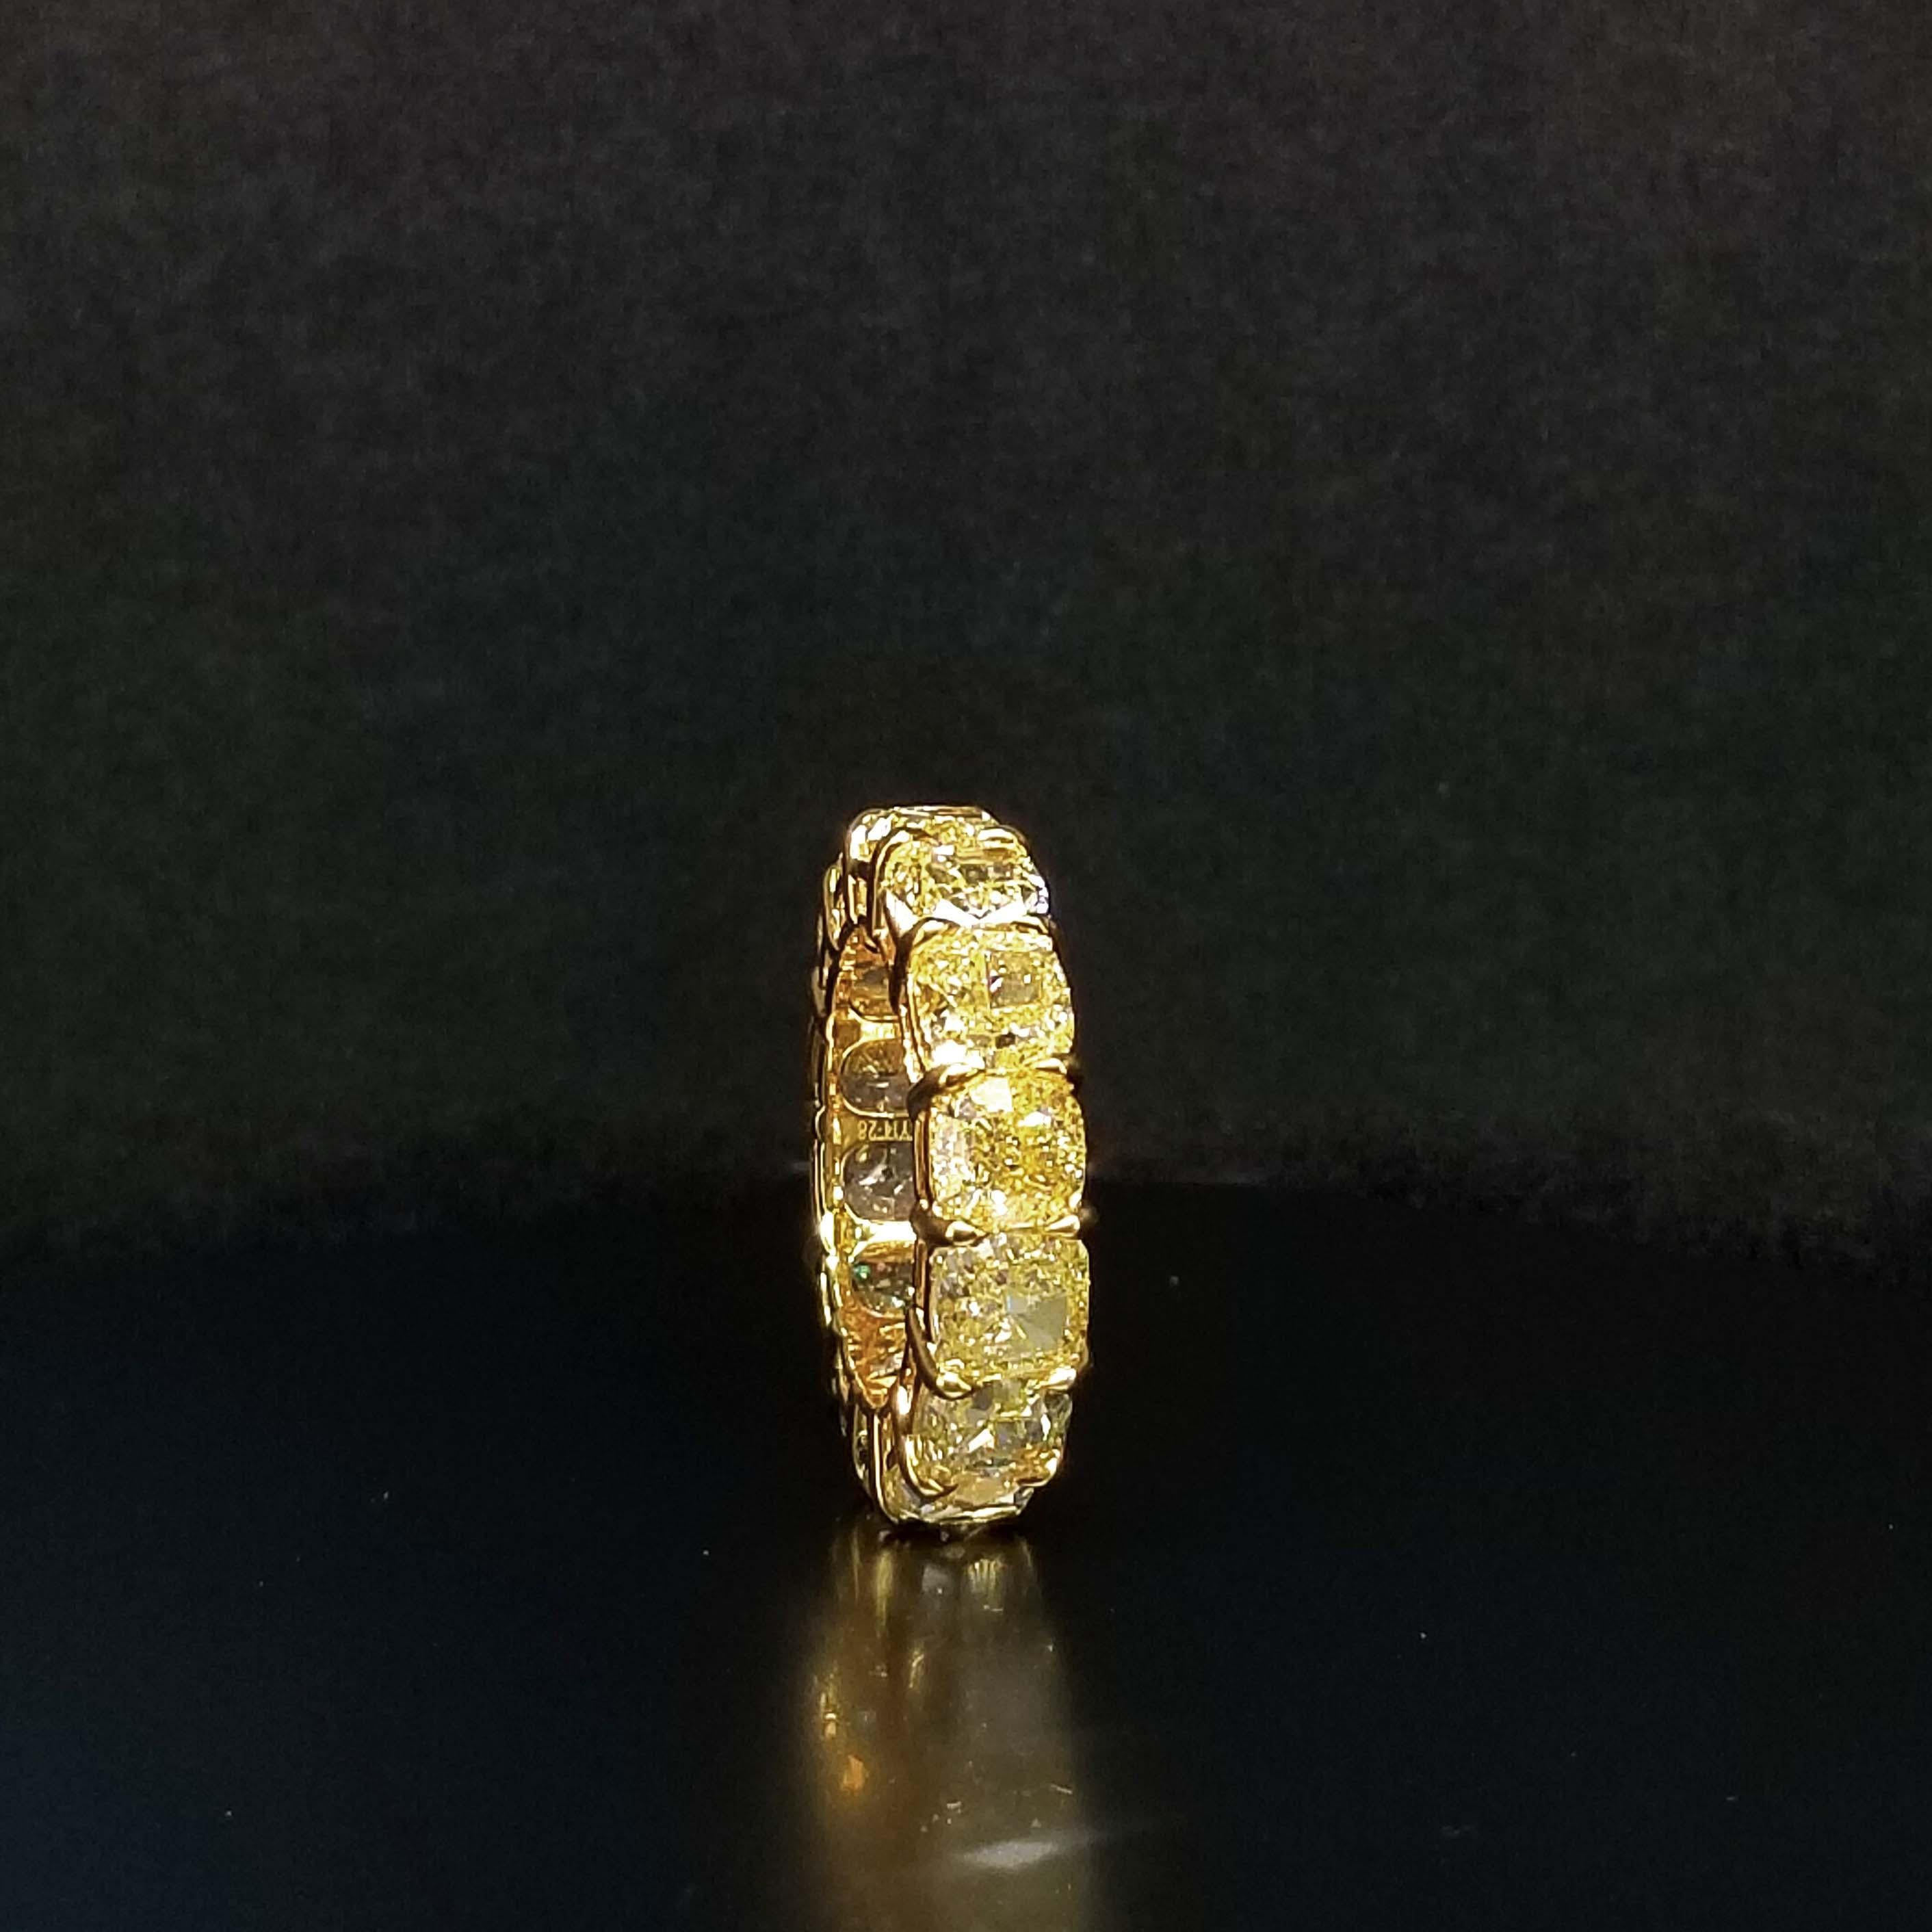 This astonishing SCARSELLI eternity band is a pleasure to wear every day and contains 14.22 carats of natural fancy yellow diamonds of VVS - VS clarity in 18 karat yellow gold. Each of the 14 diamonds has a GIA grading certificate ( see some of the